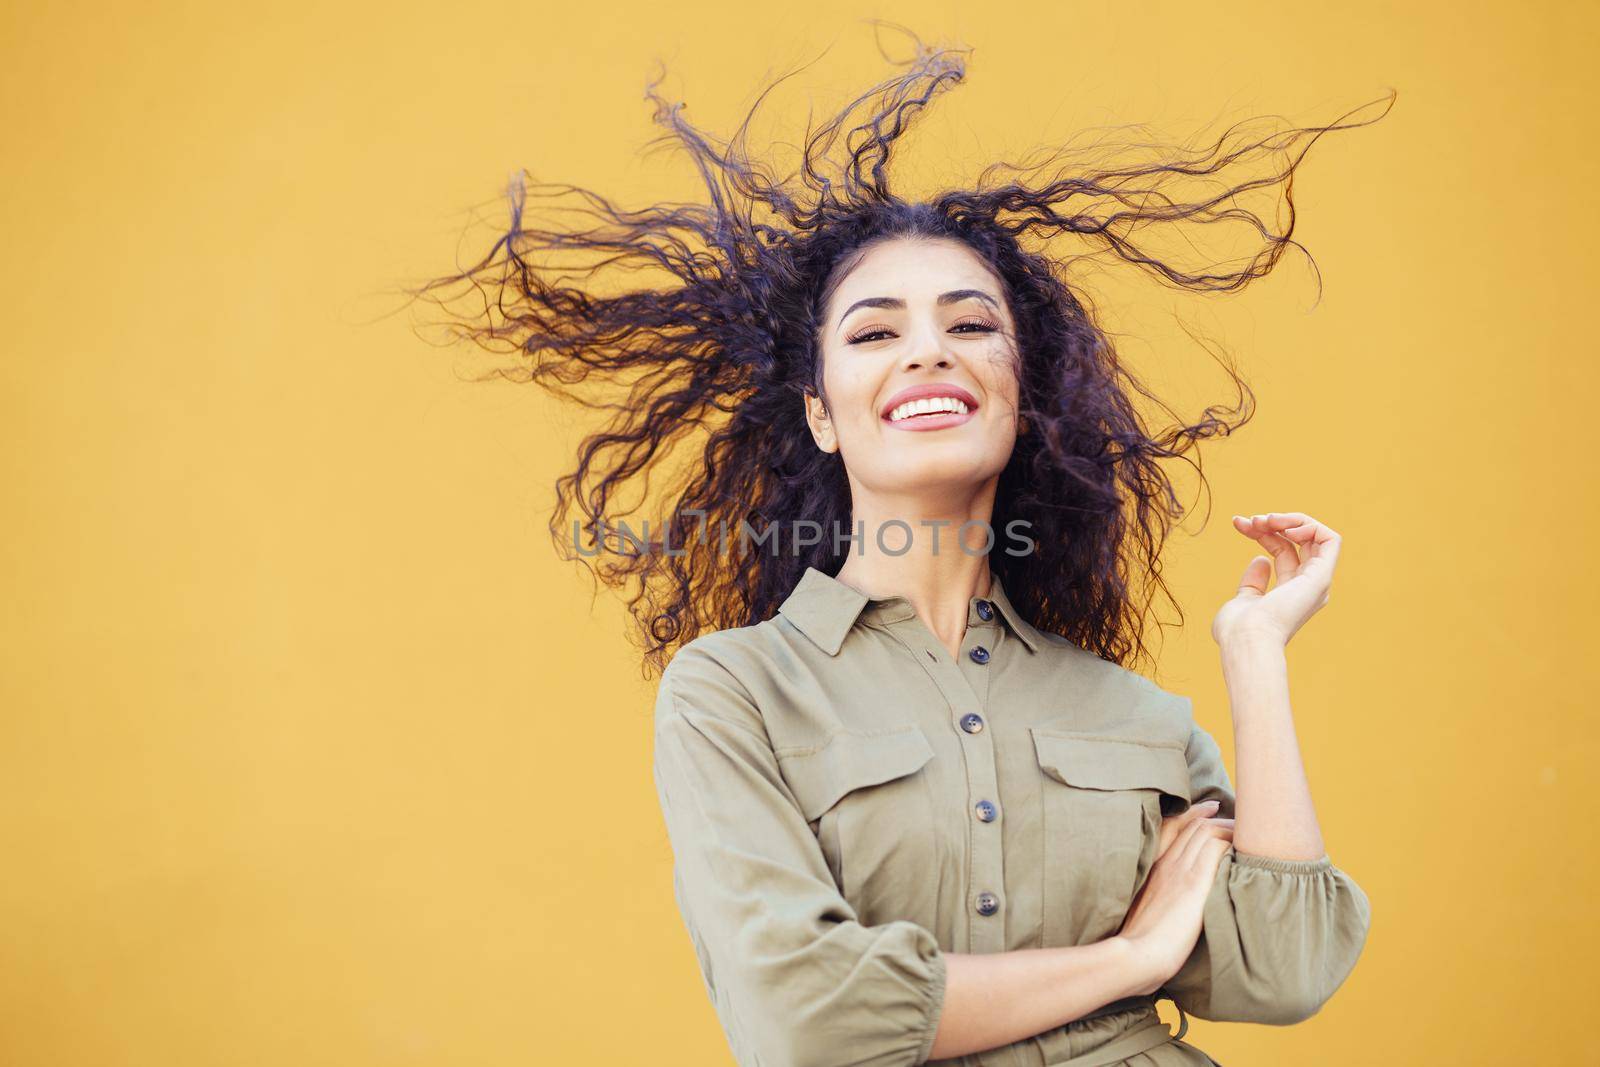 Arab woman with curly hair moved by the wind in urban background